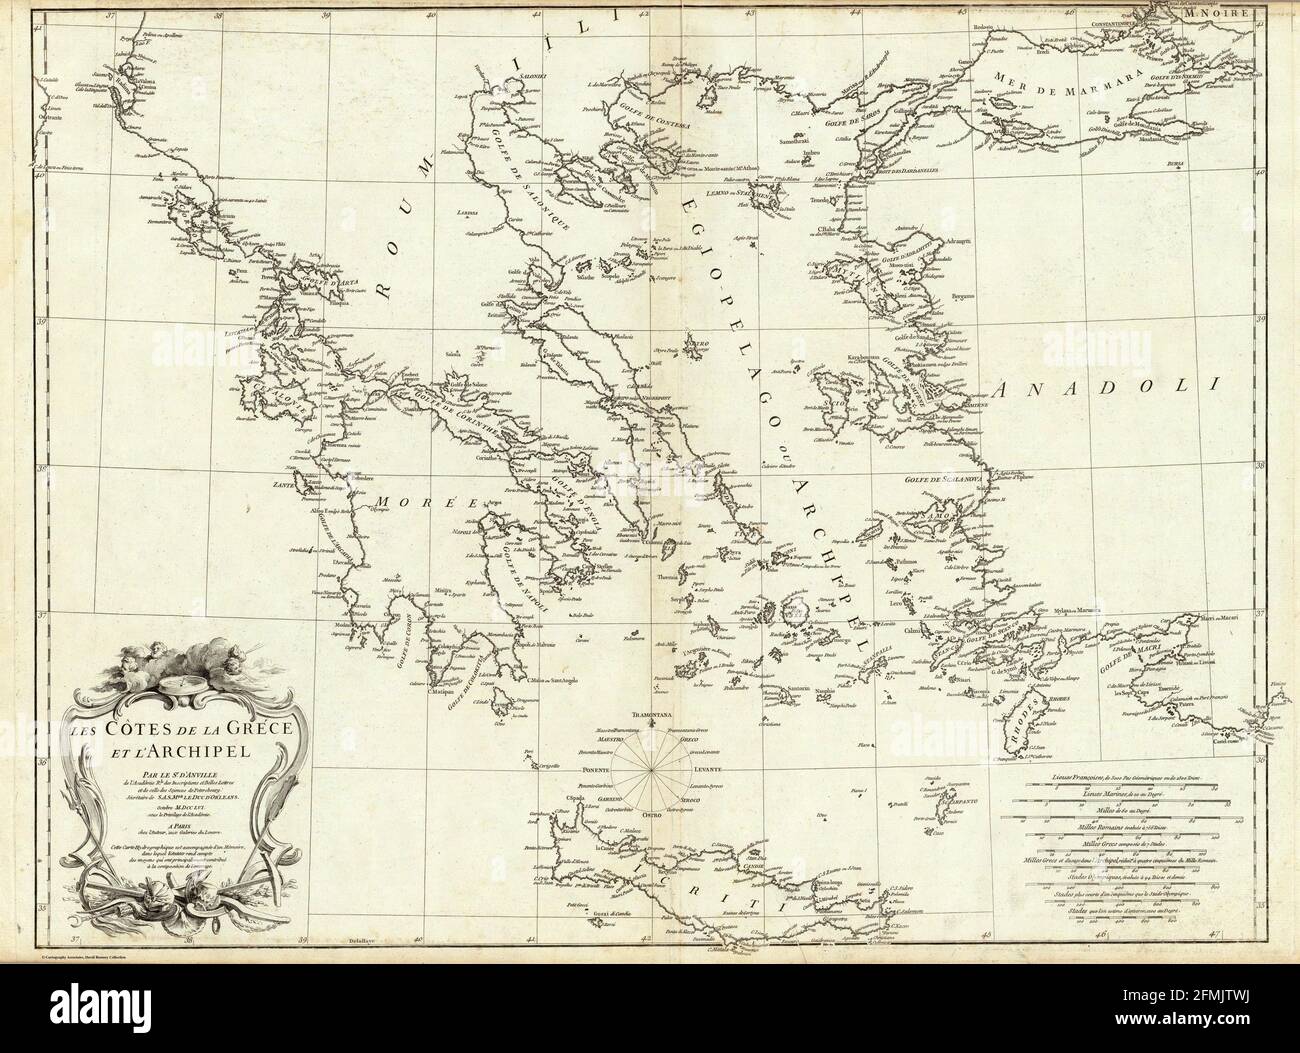 Vintage copper engraved map of Greece from 18th century. All maps are beautifully colored and illustrated showing the world at the time. Stock Photo